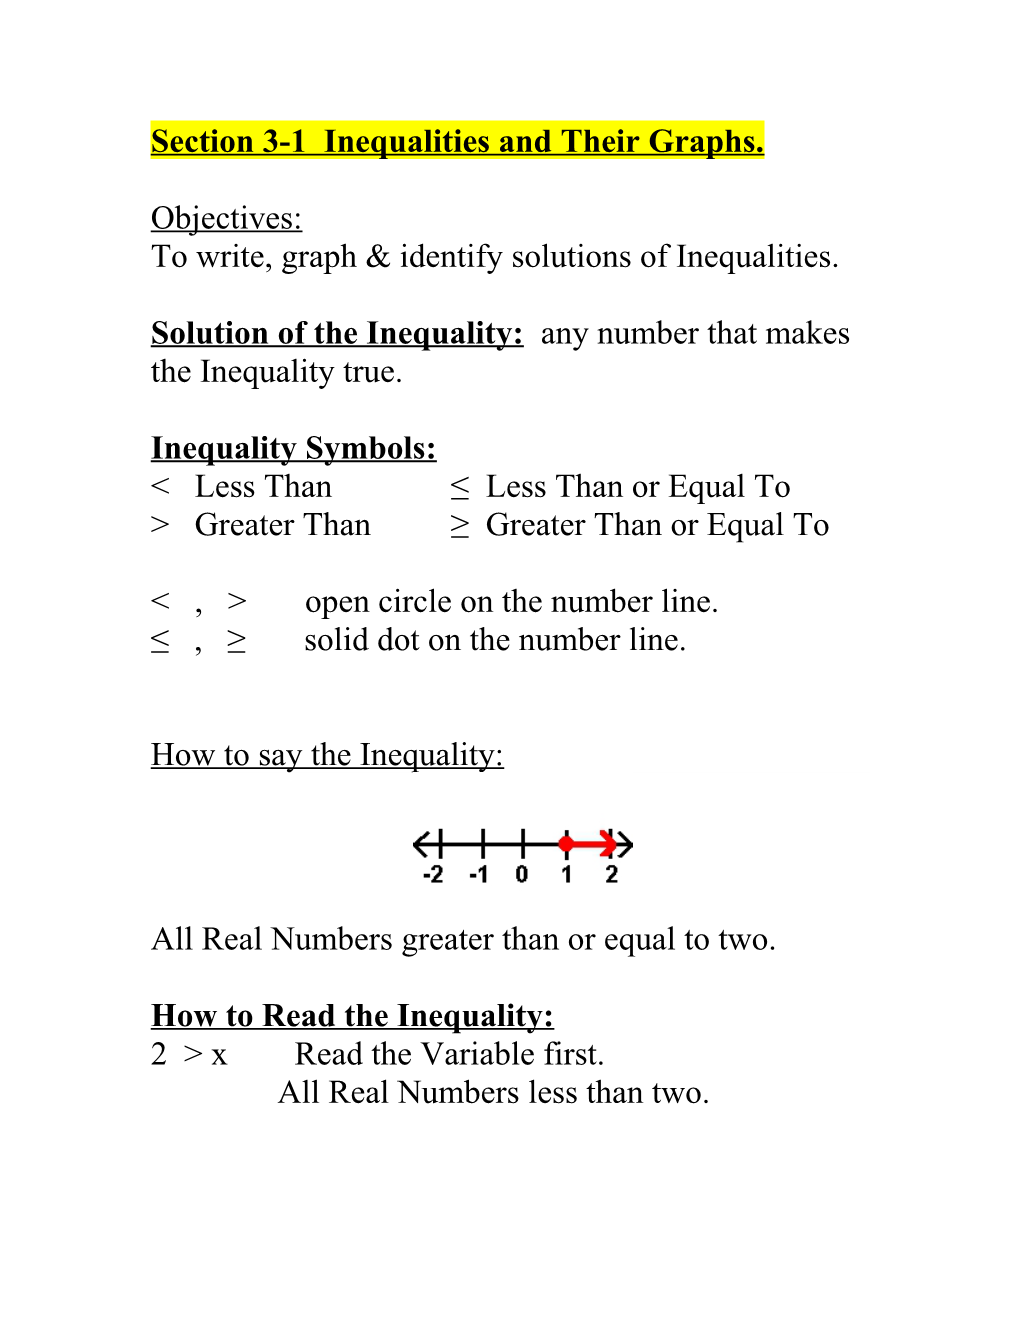 Section 3-1 Inequalities and Their Graphs